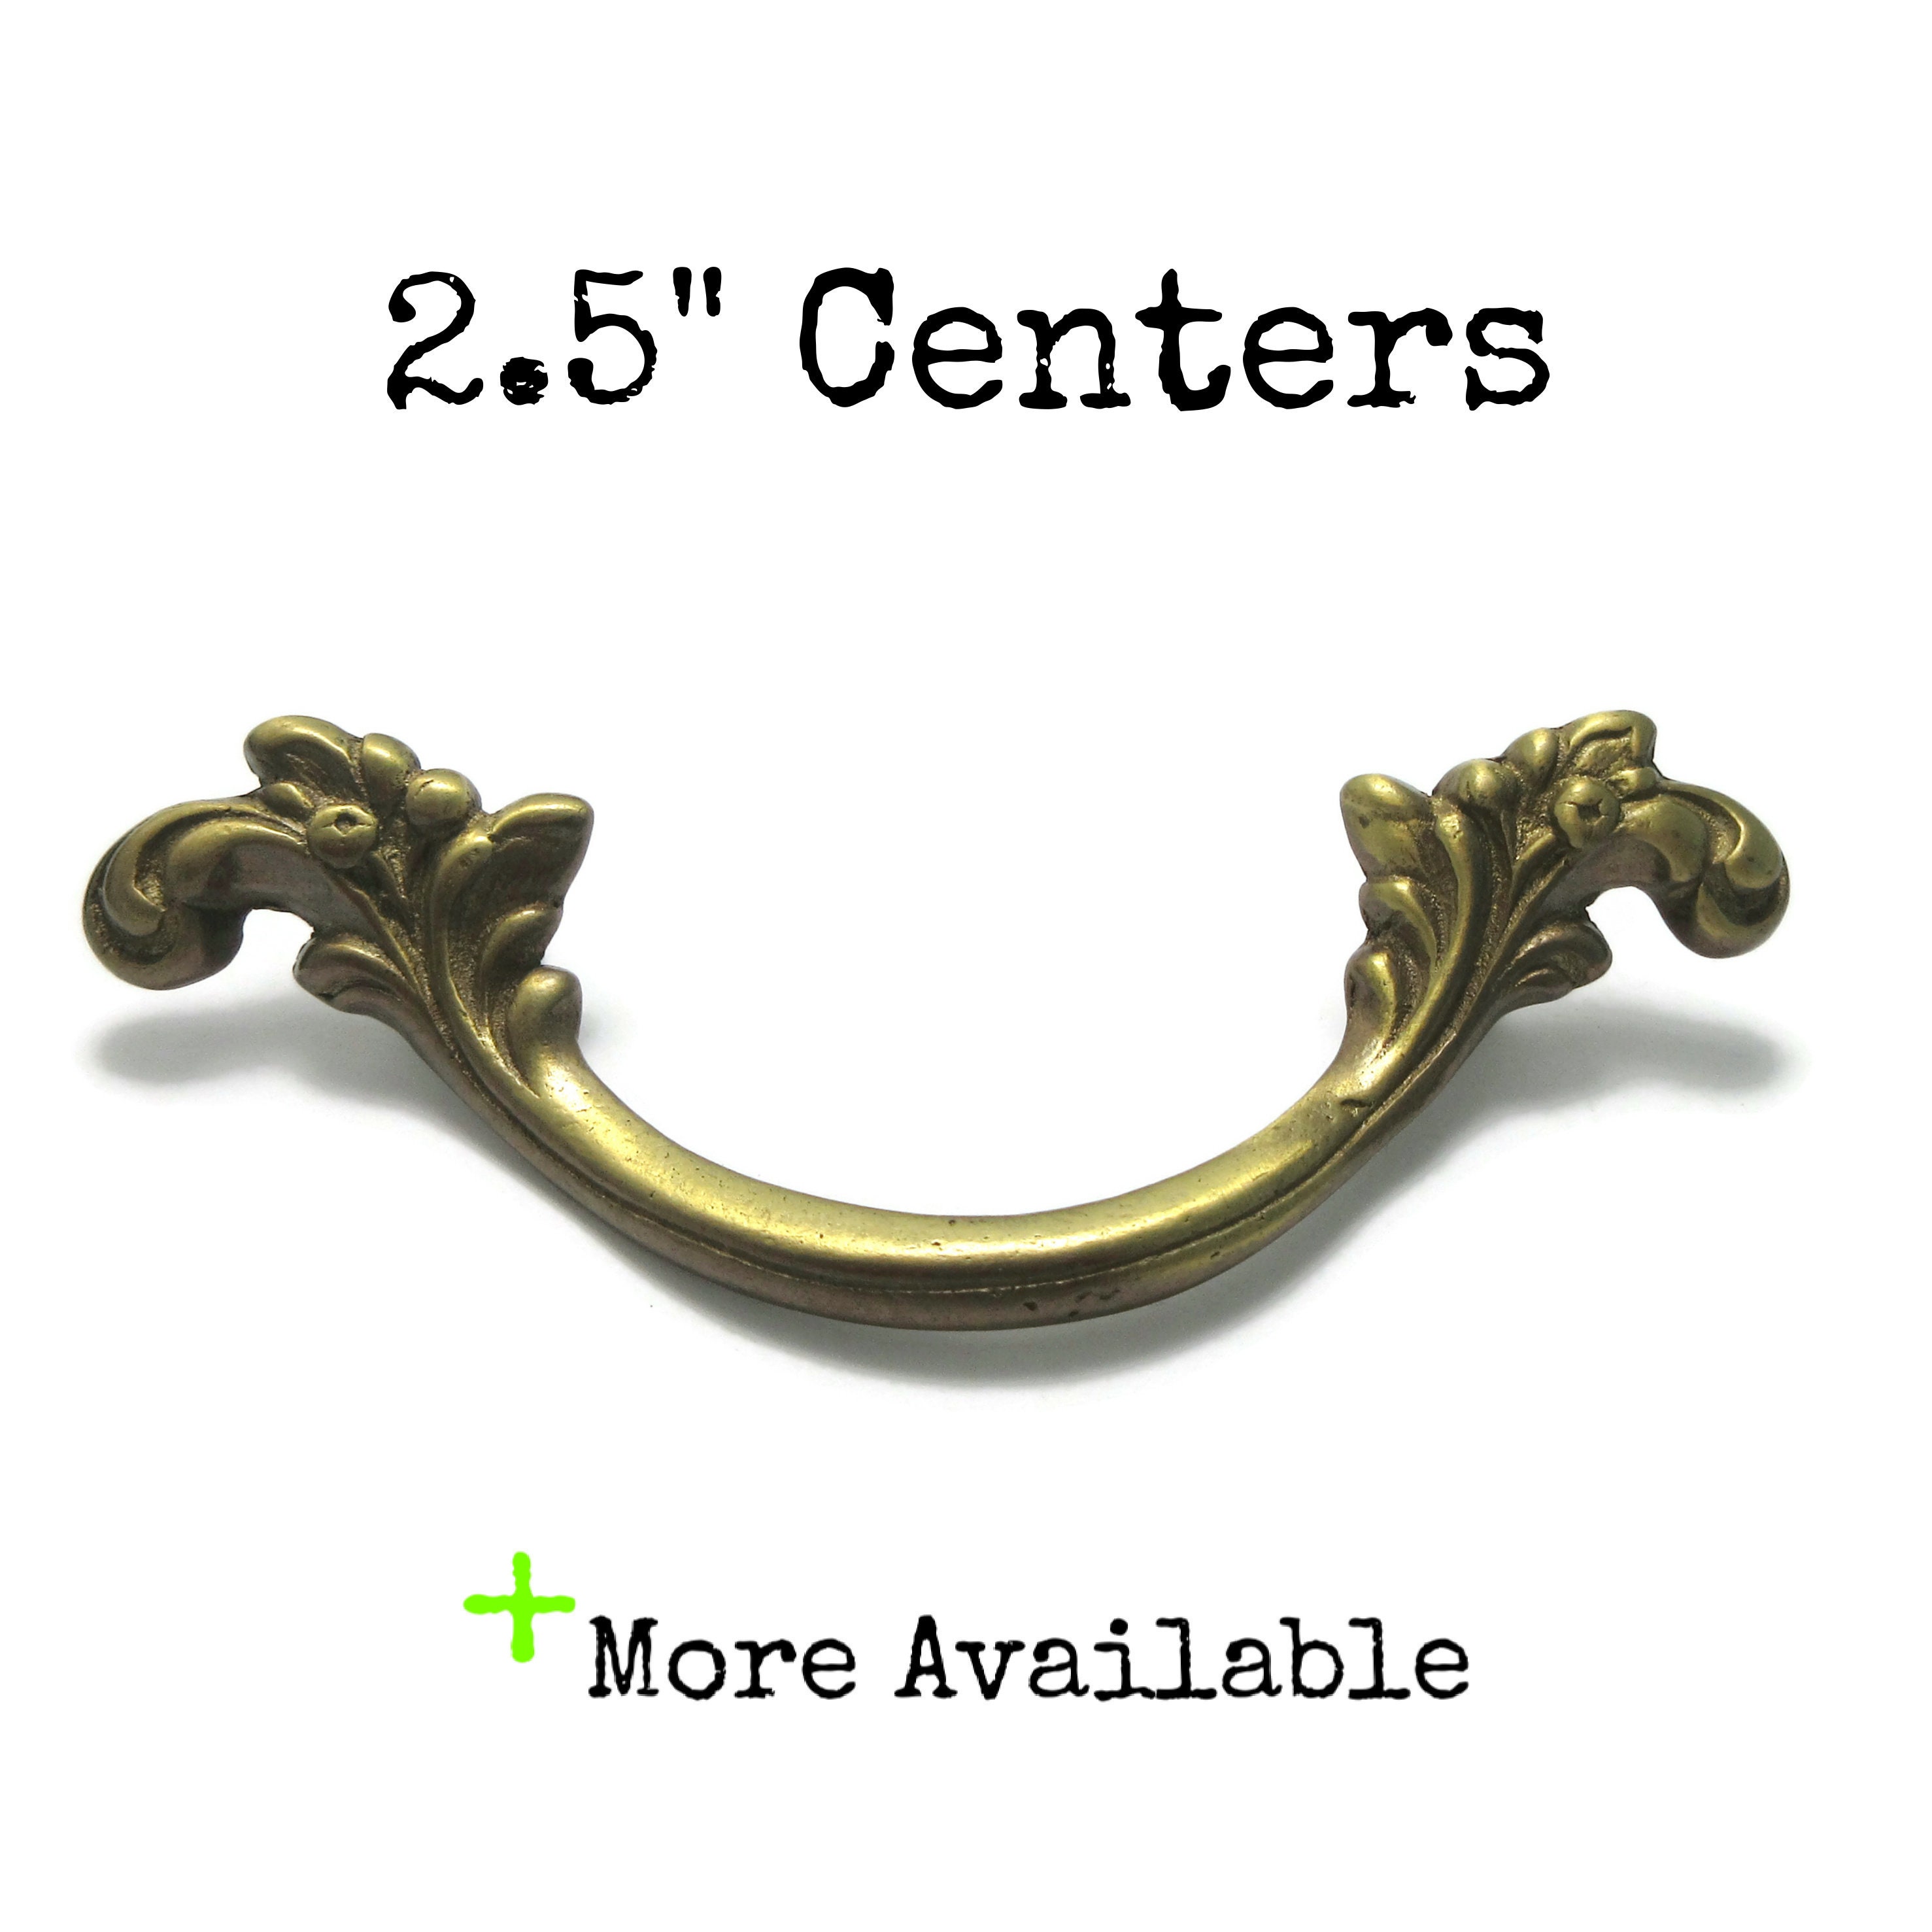 2.5, 3, 3.5 Centers ANTIQUED & Polished BRASS QUEEN ANNE BAIL